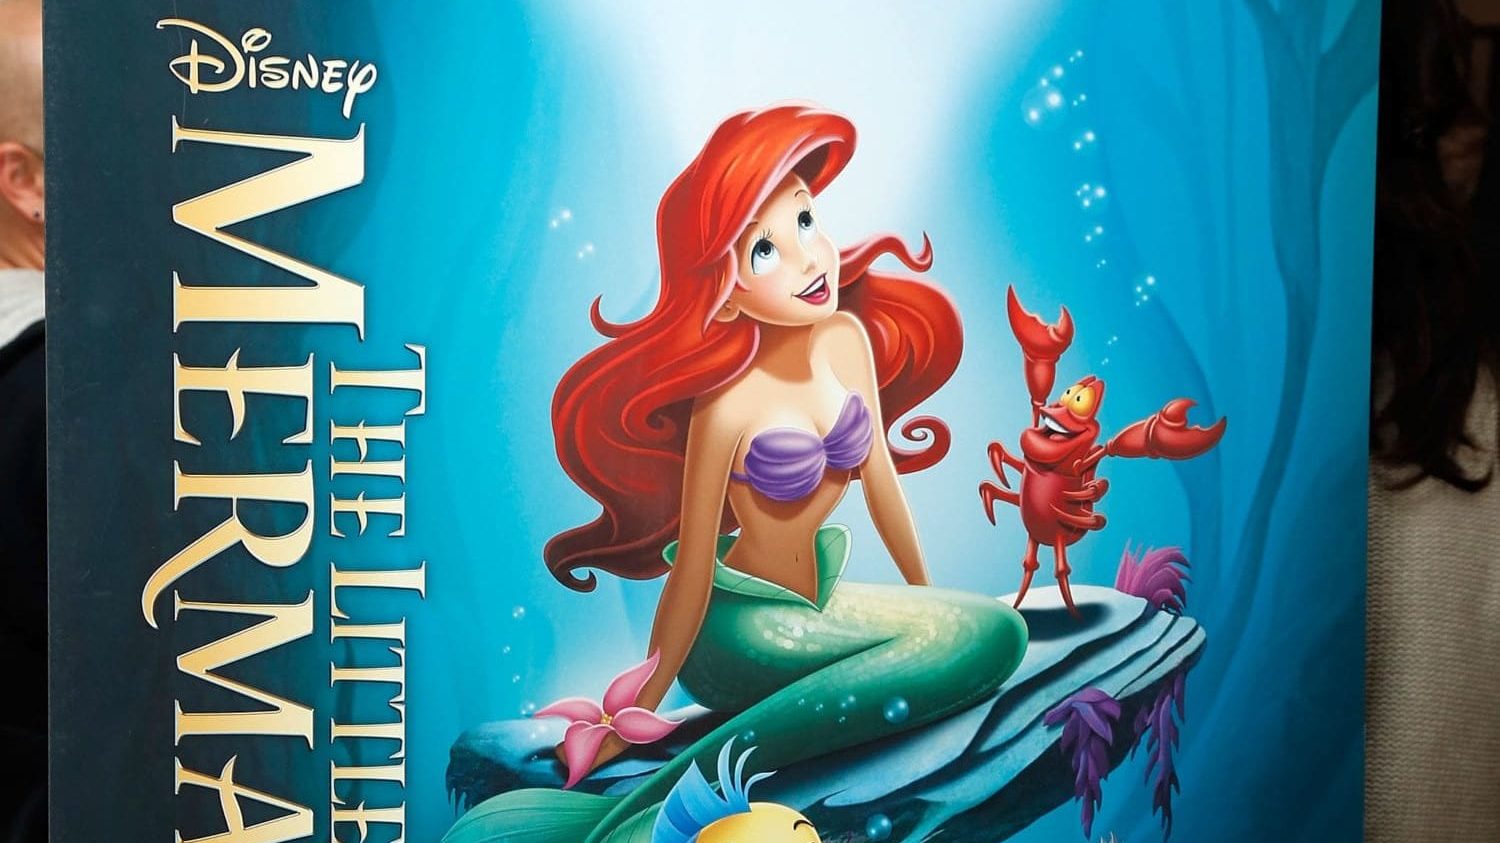 Disney's The Little Mermaid Special Screening At The Walter Reade Theater